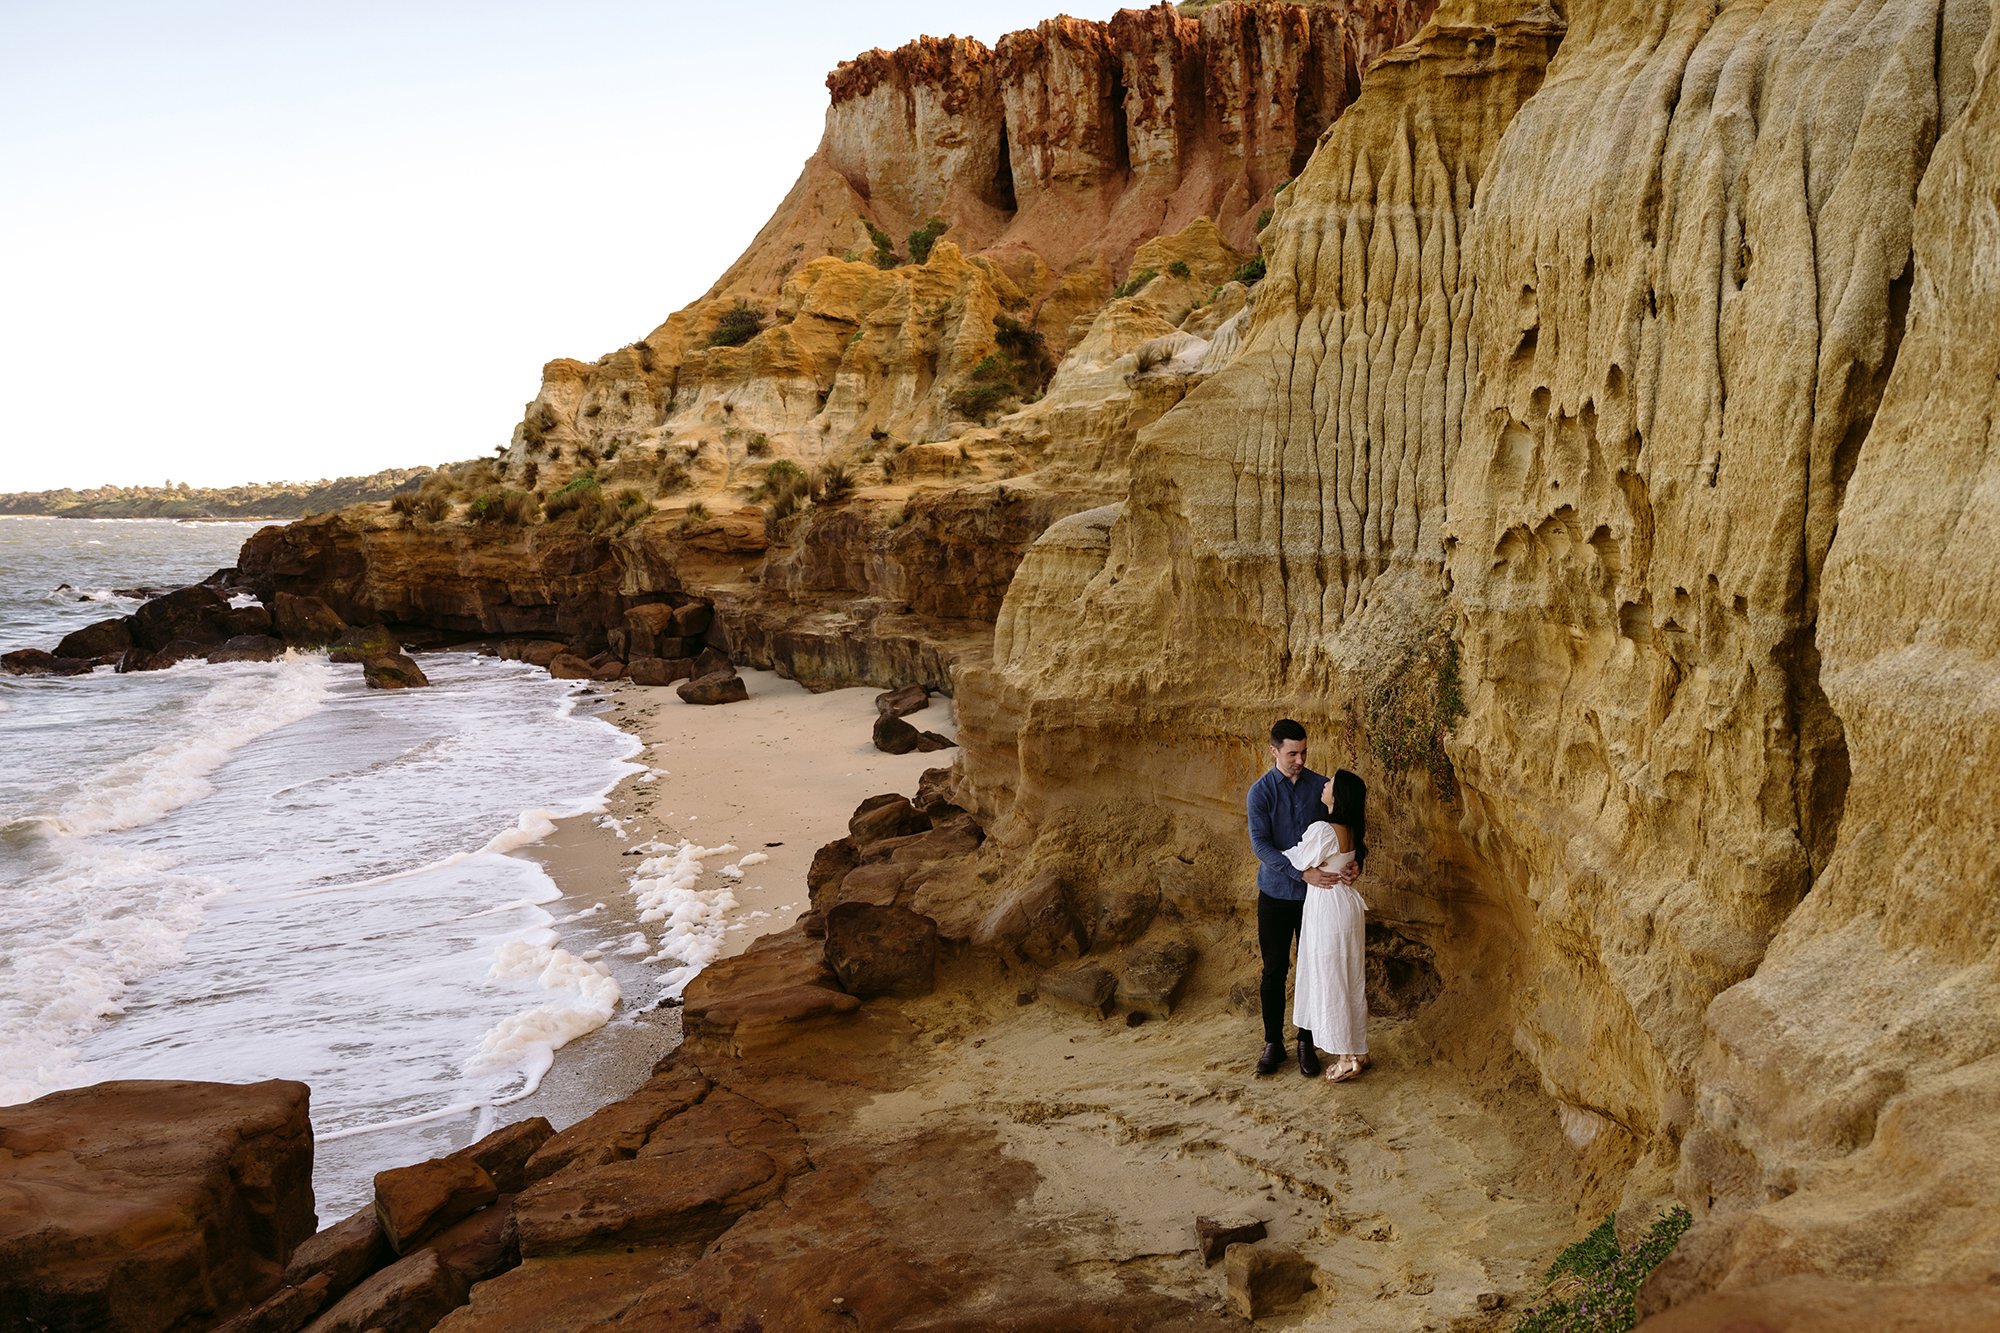 A couple are standing together at the beach photo location